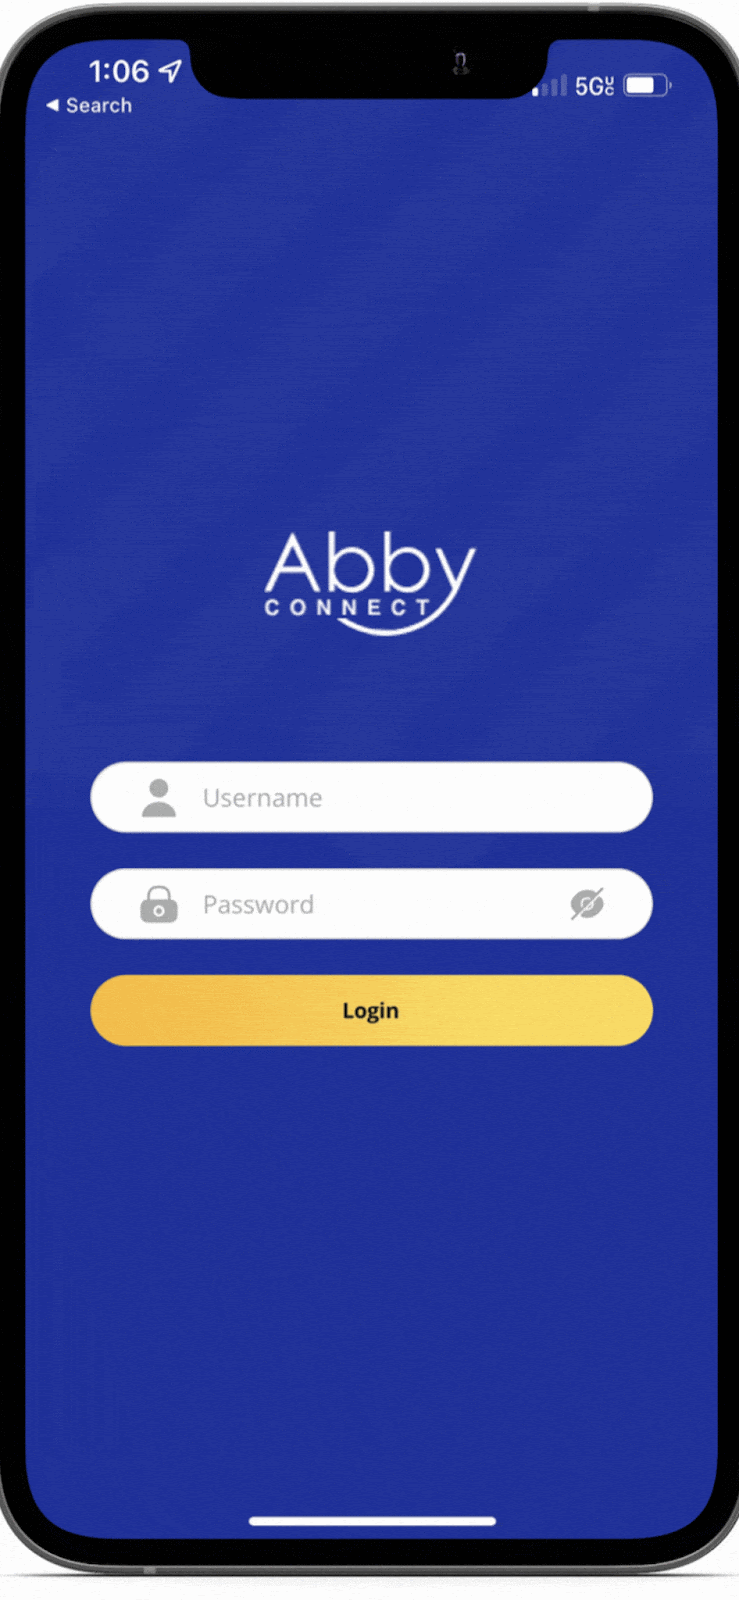 GIF showing Abby's iPhone interface and different app capabilities.